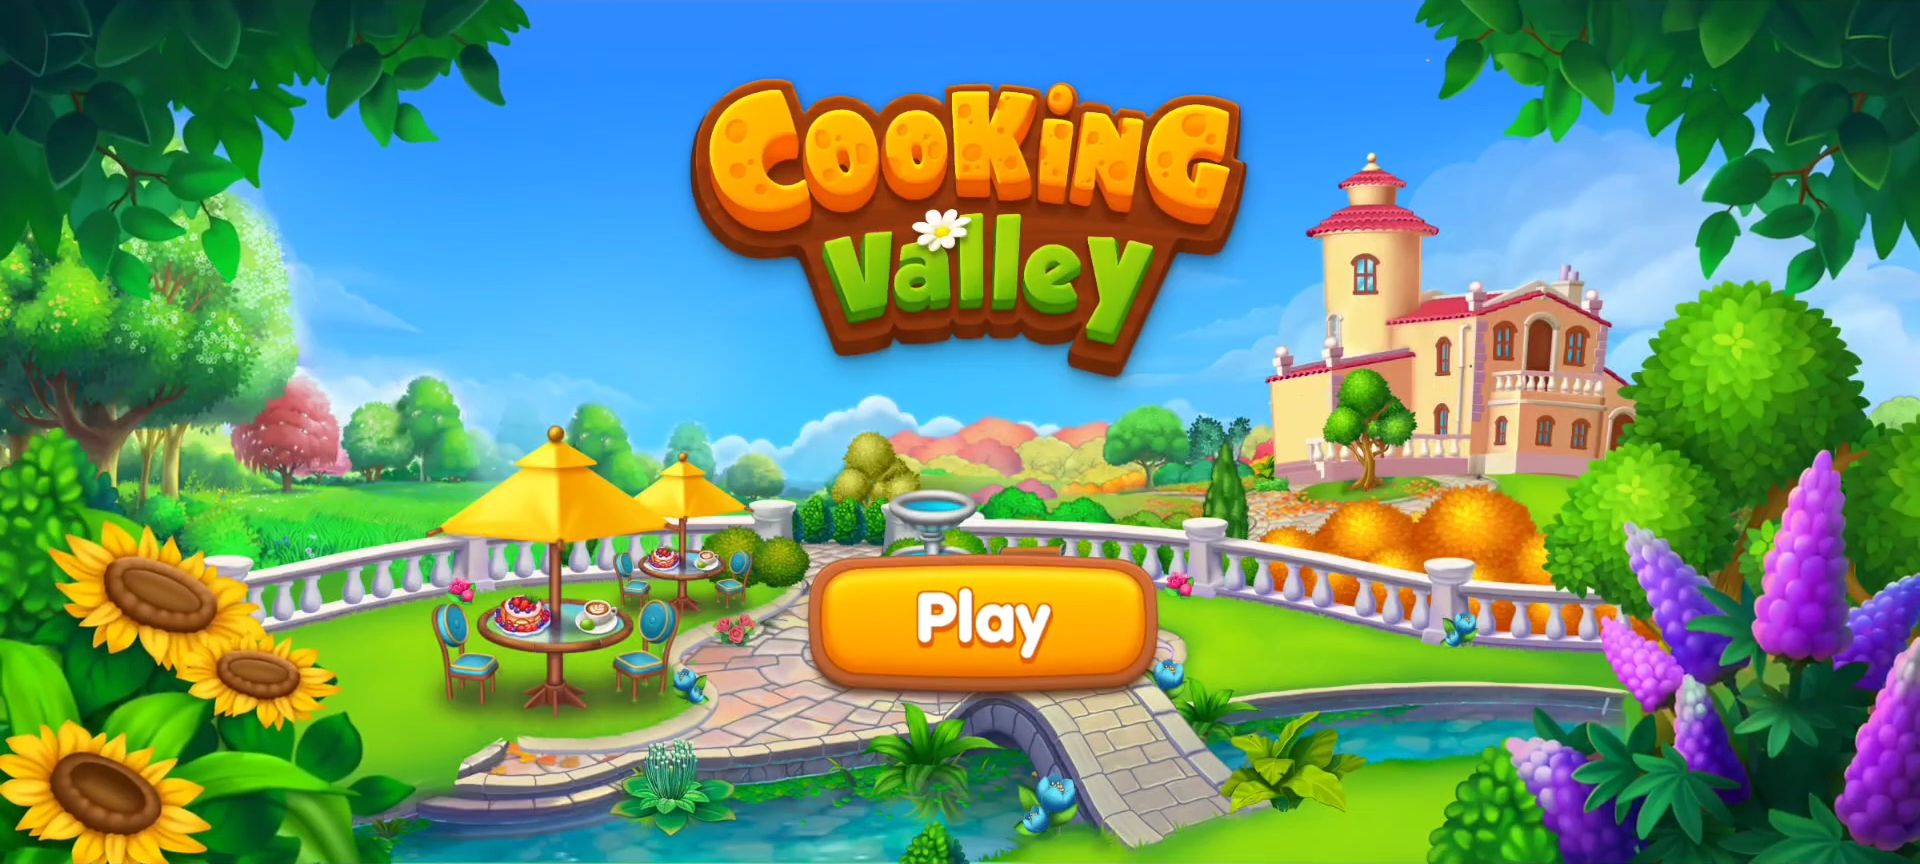 Scarica Valley: Cooking Games & Design gratis per Android.